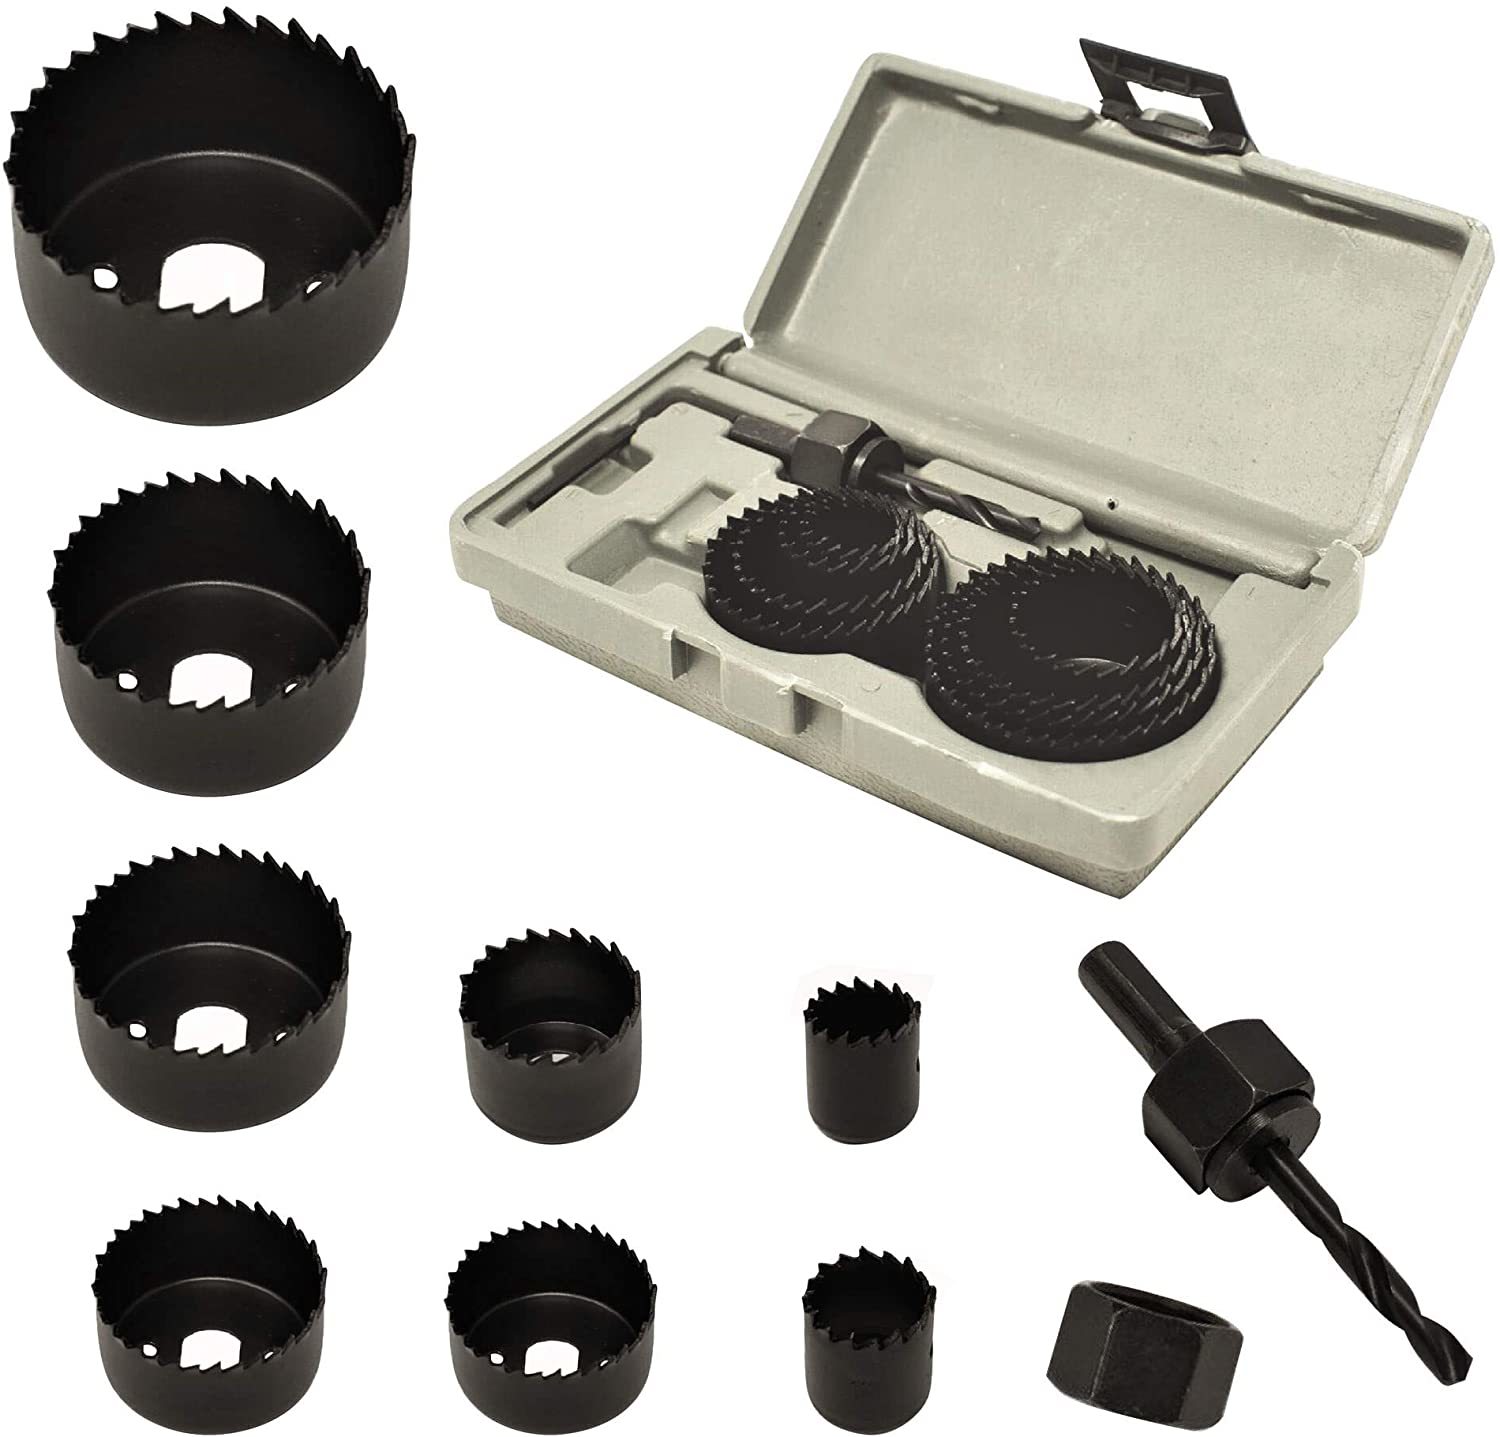 Hole Saw Kit for Wood